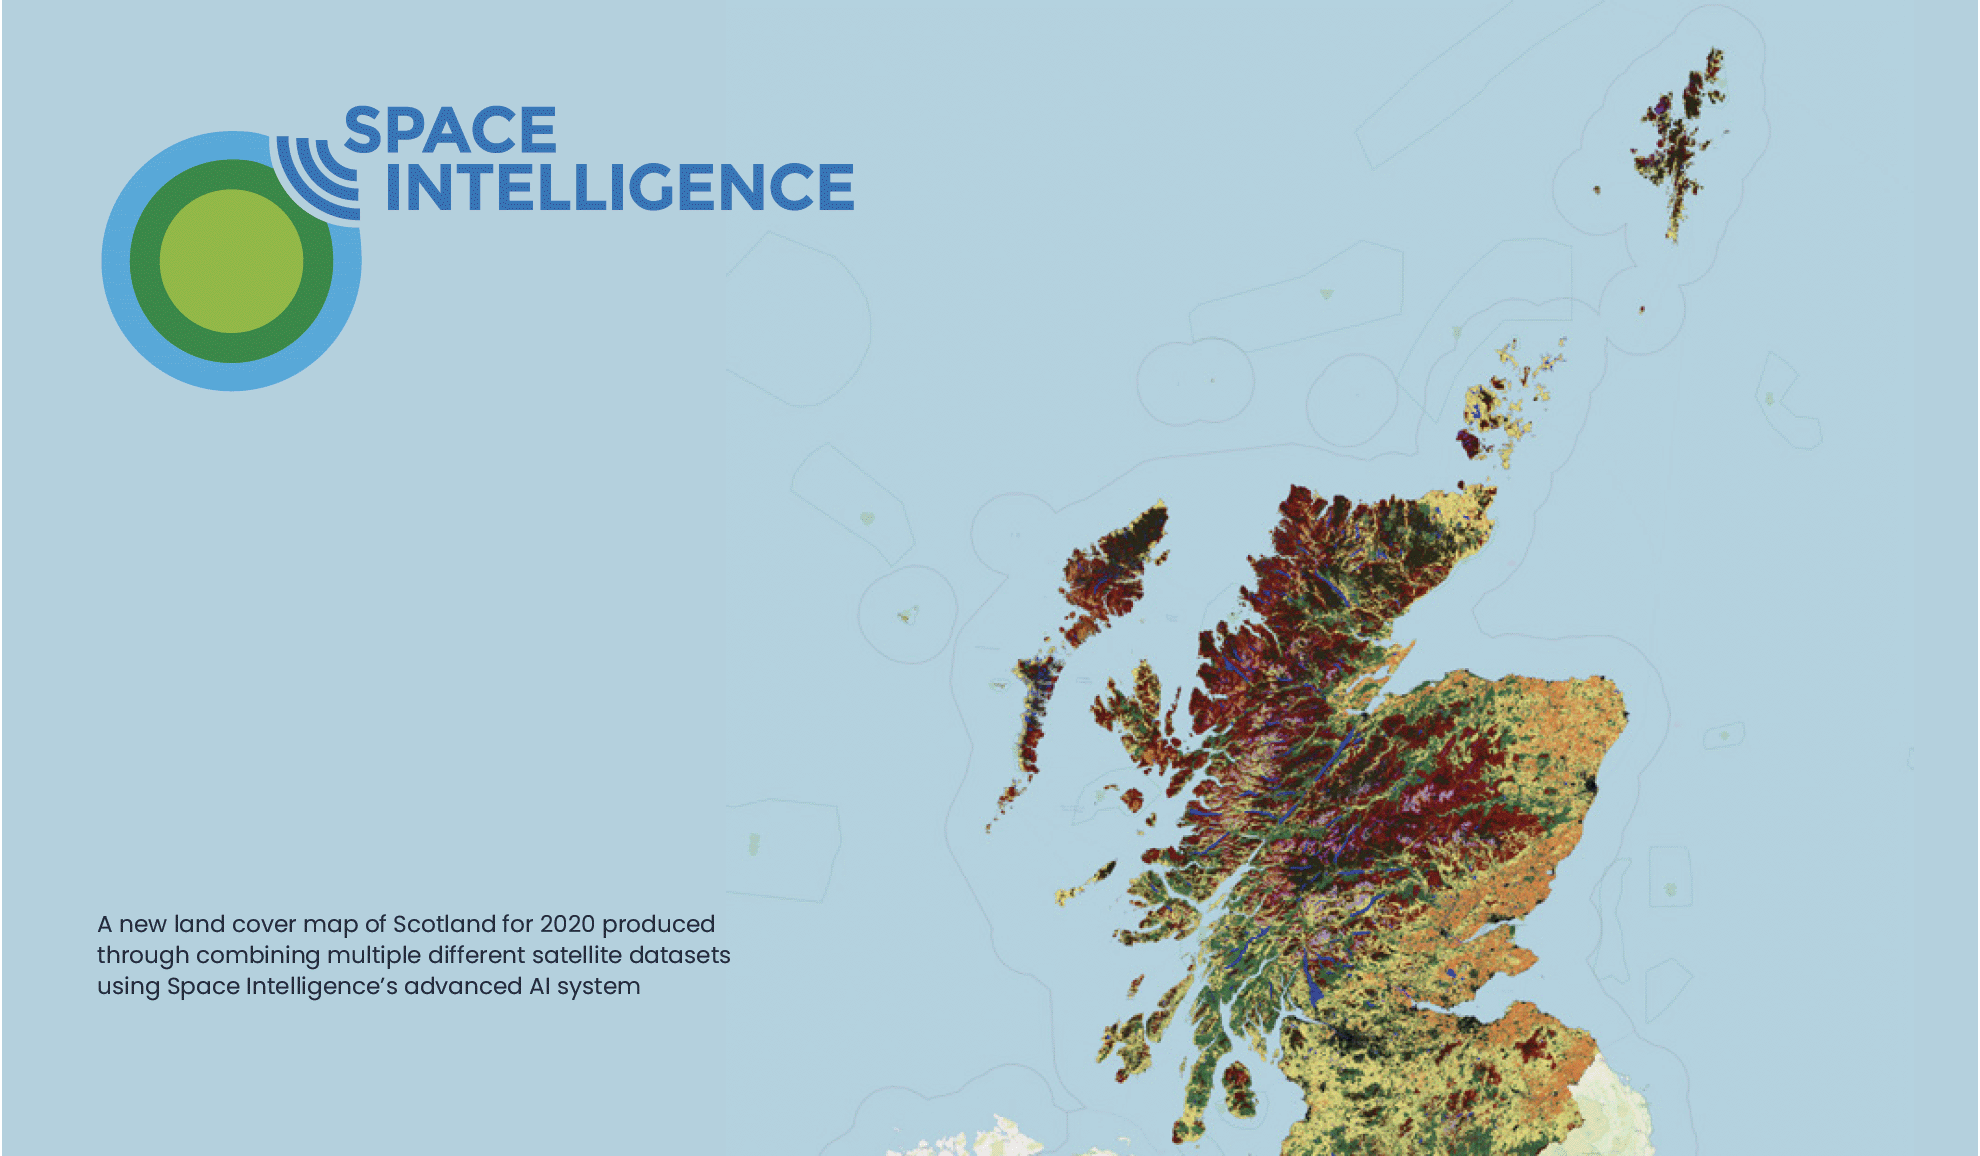 A satellite image of Scotland, with different types of land cover mapped by colour.